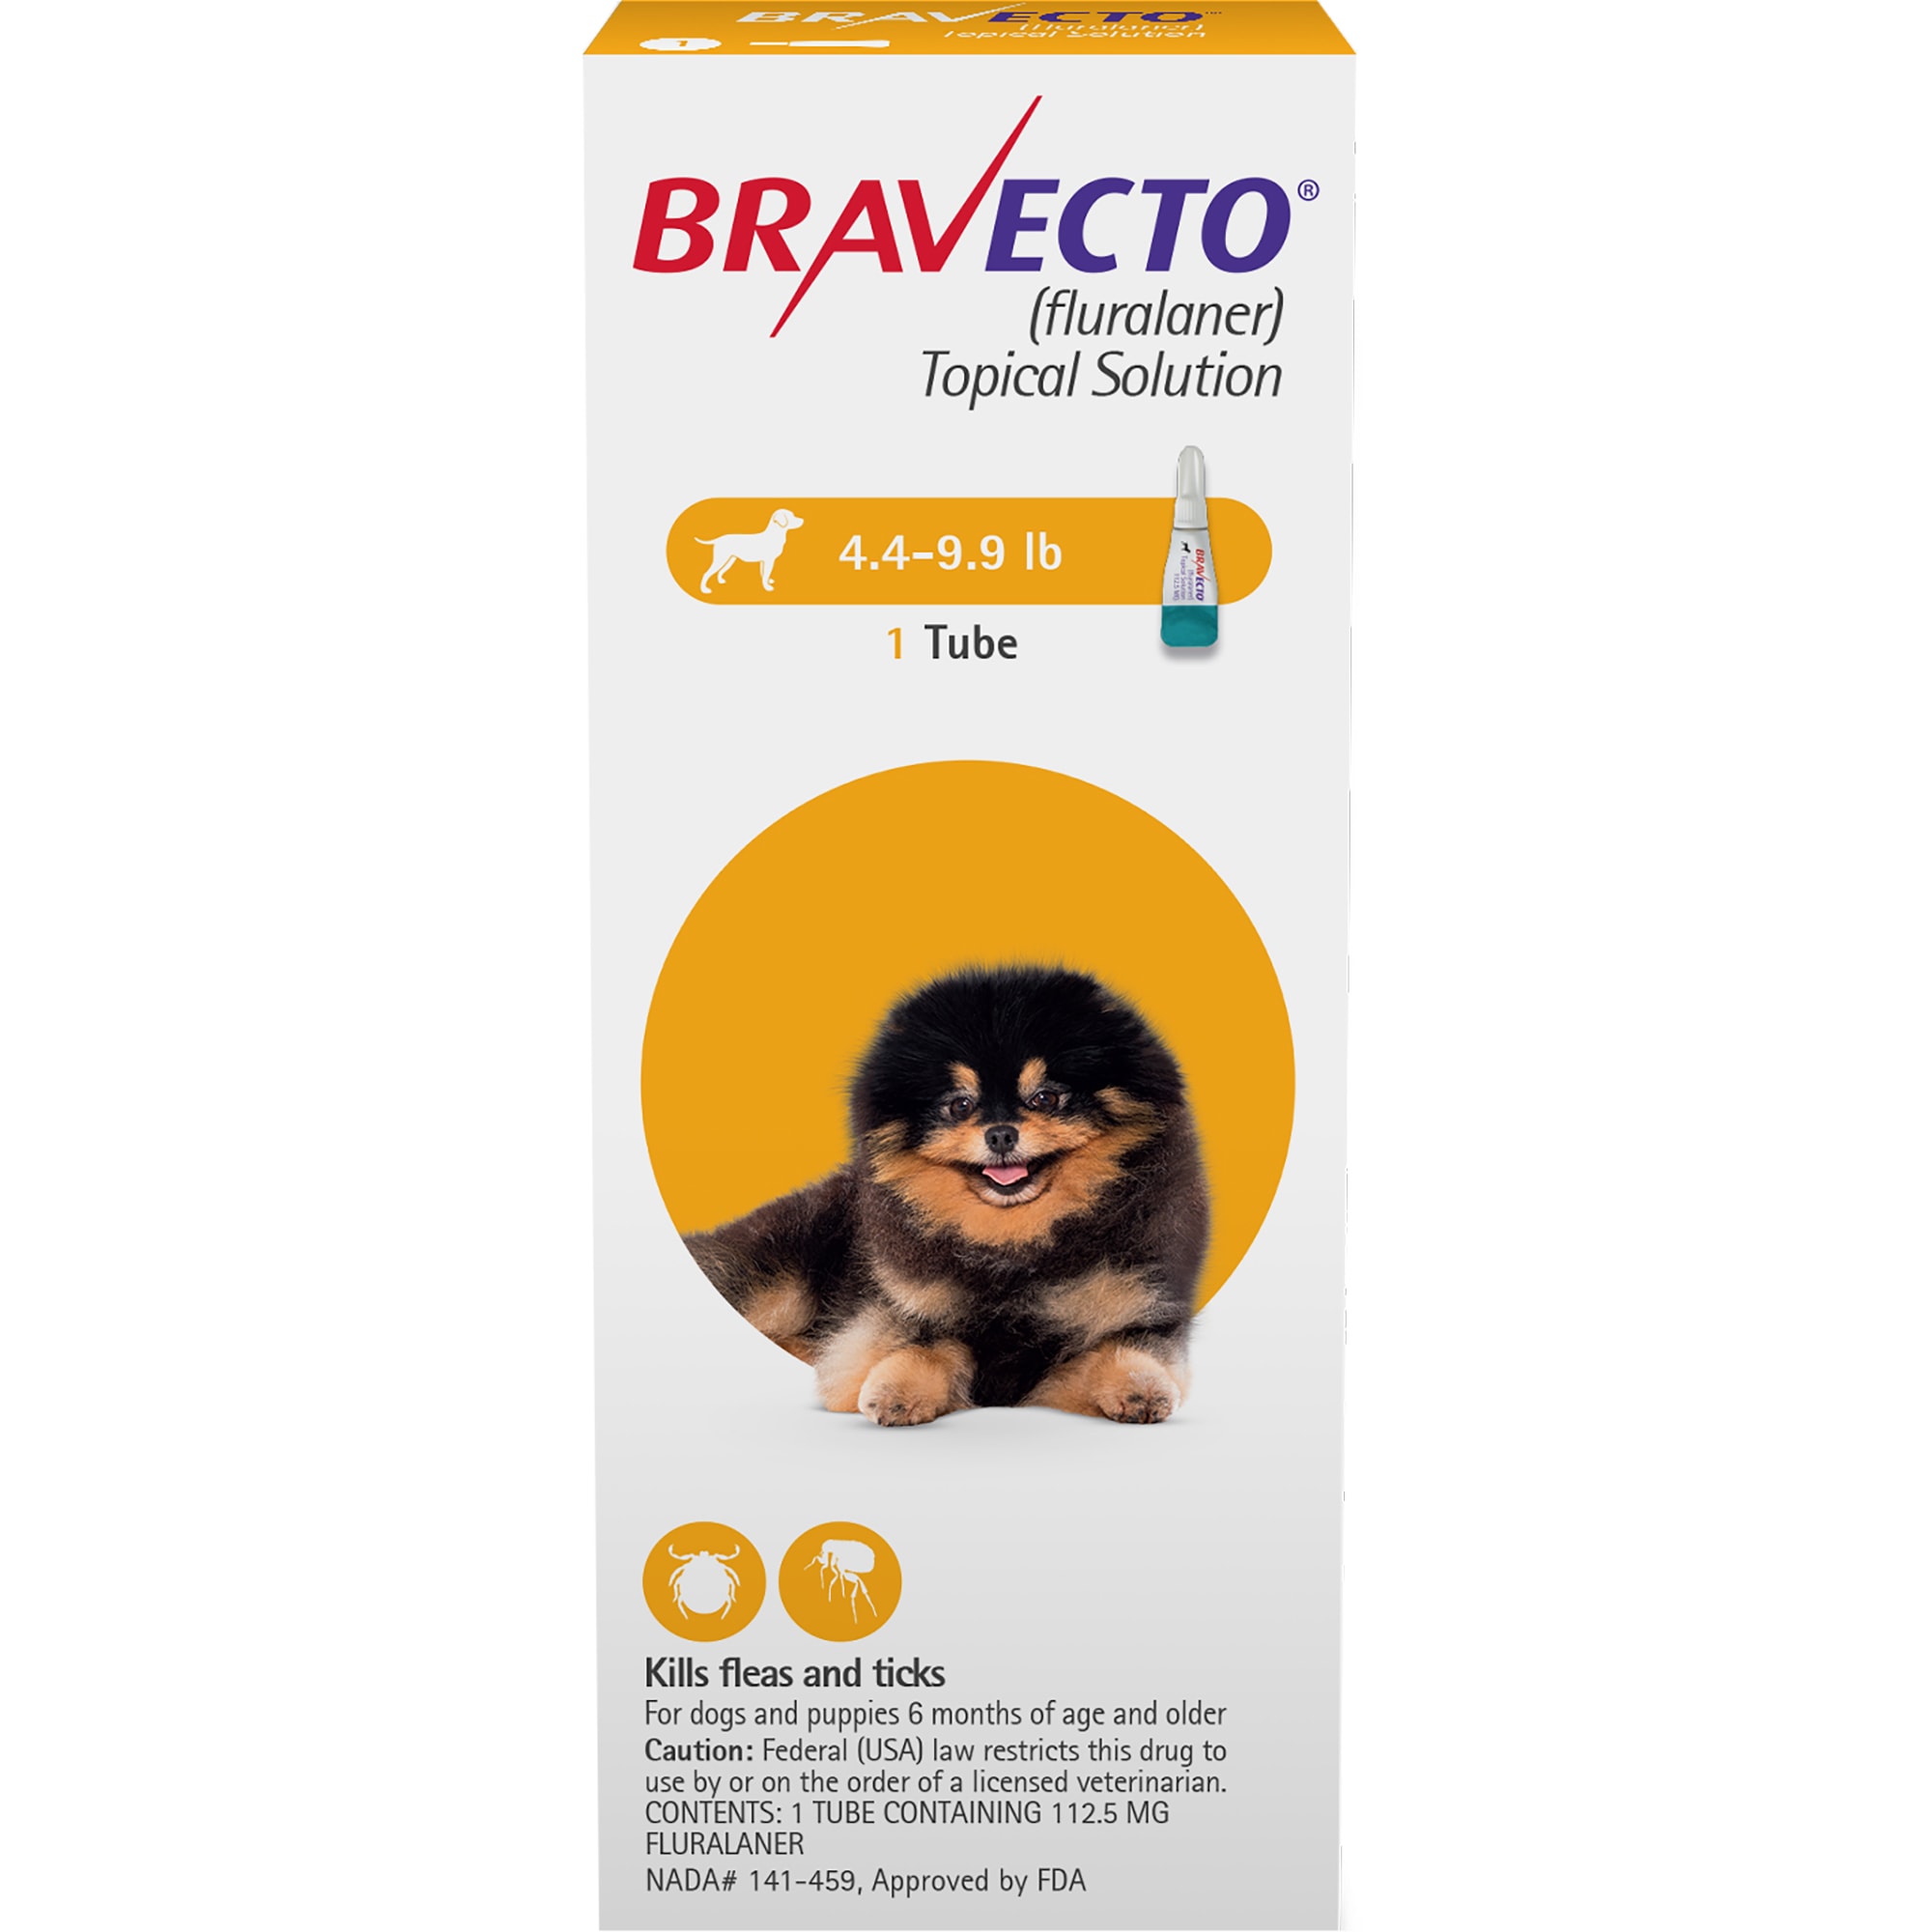 Bravecto Topical Solution for Dogs 22-44 lbs (10-20 kg) - Green 1